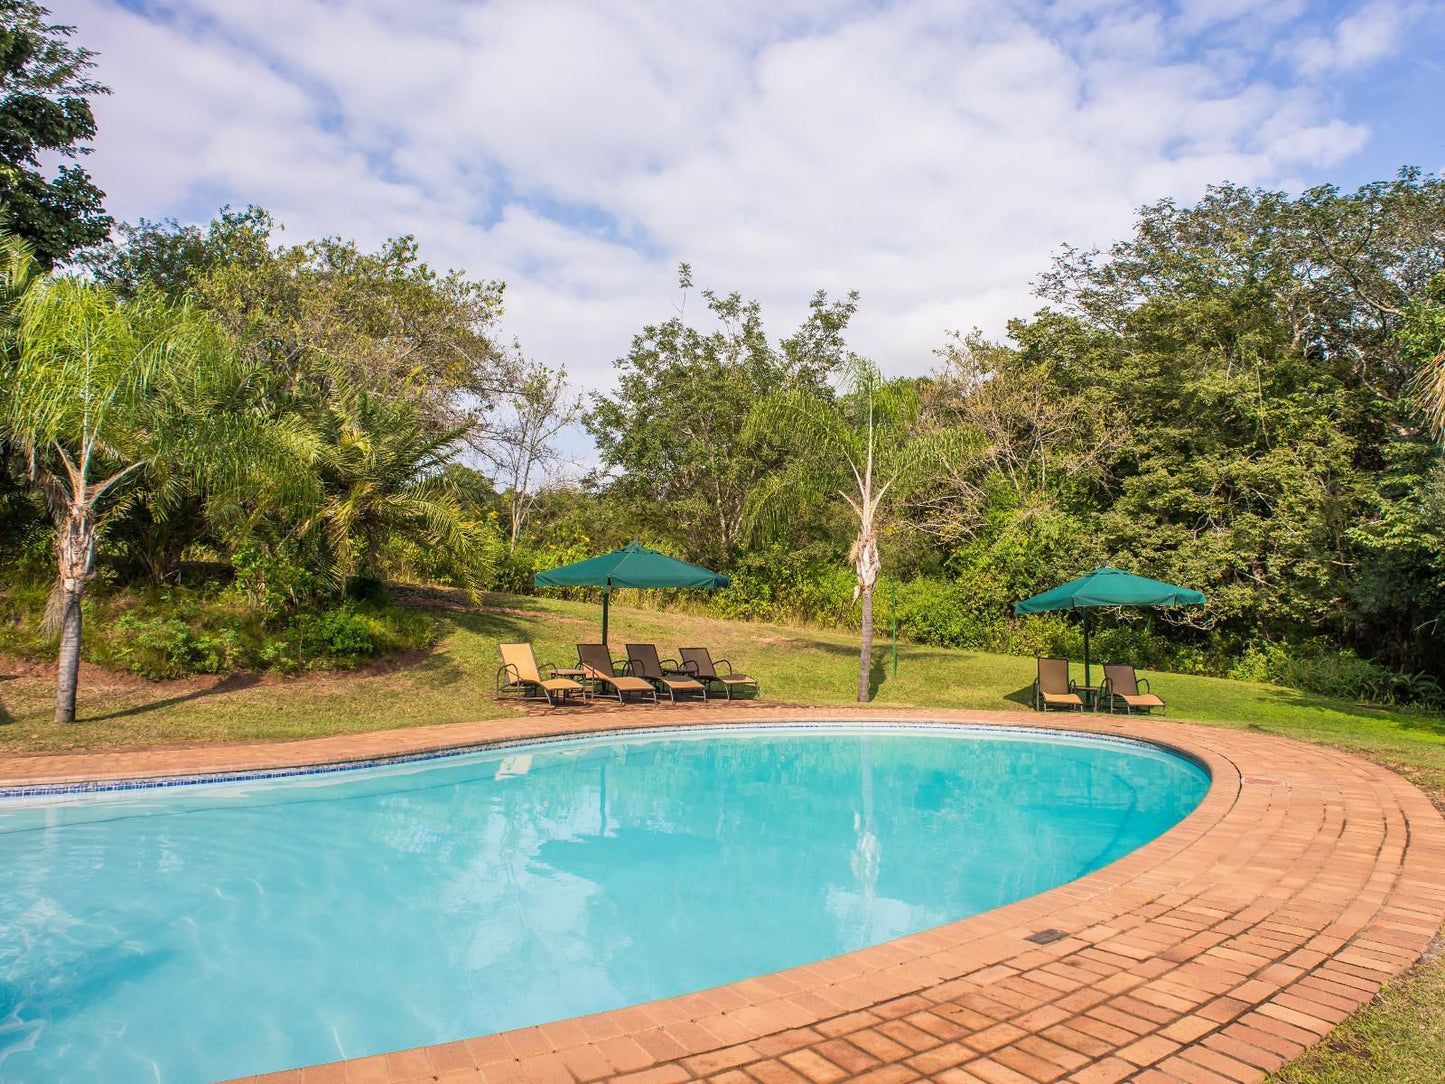 Qv Africa Collection Kubu Lodge Hazyview Mpumalanga South Africa Complementary Colors, Swimming Pool